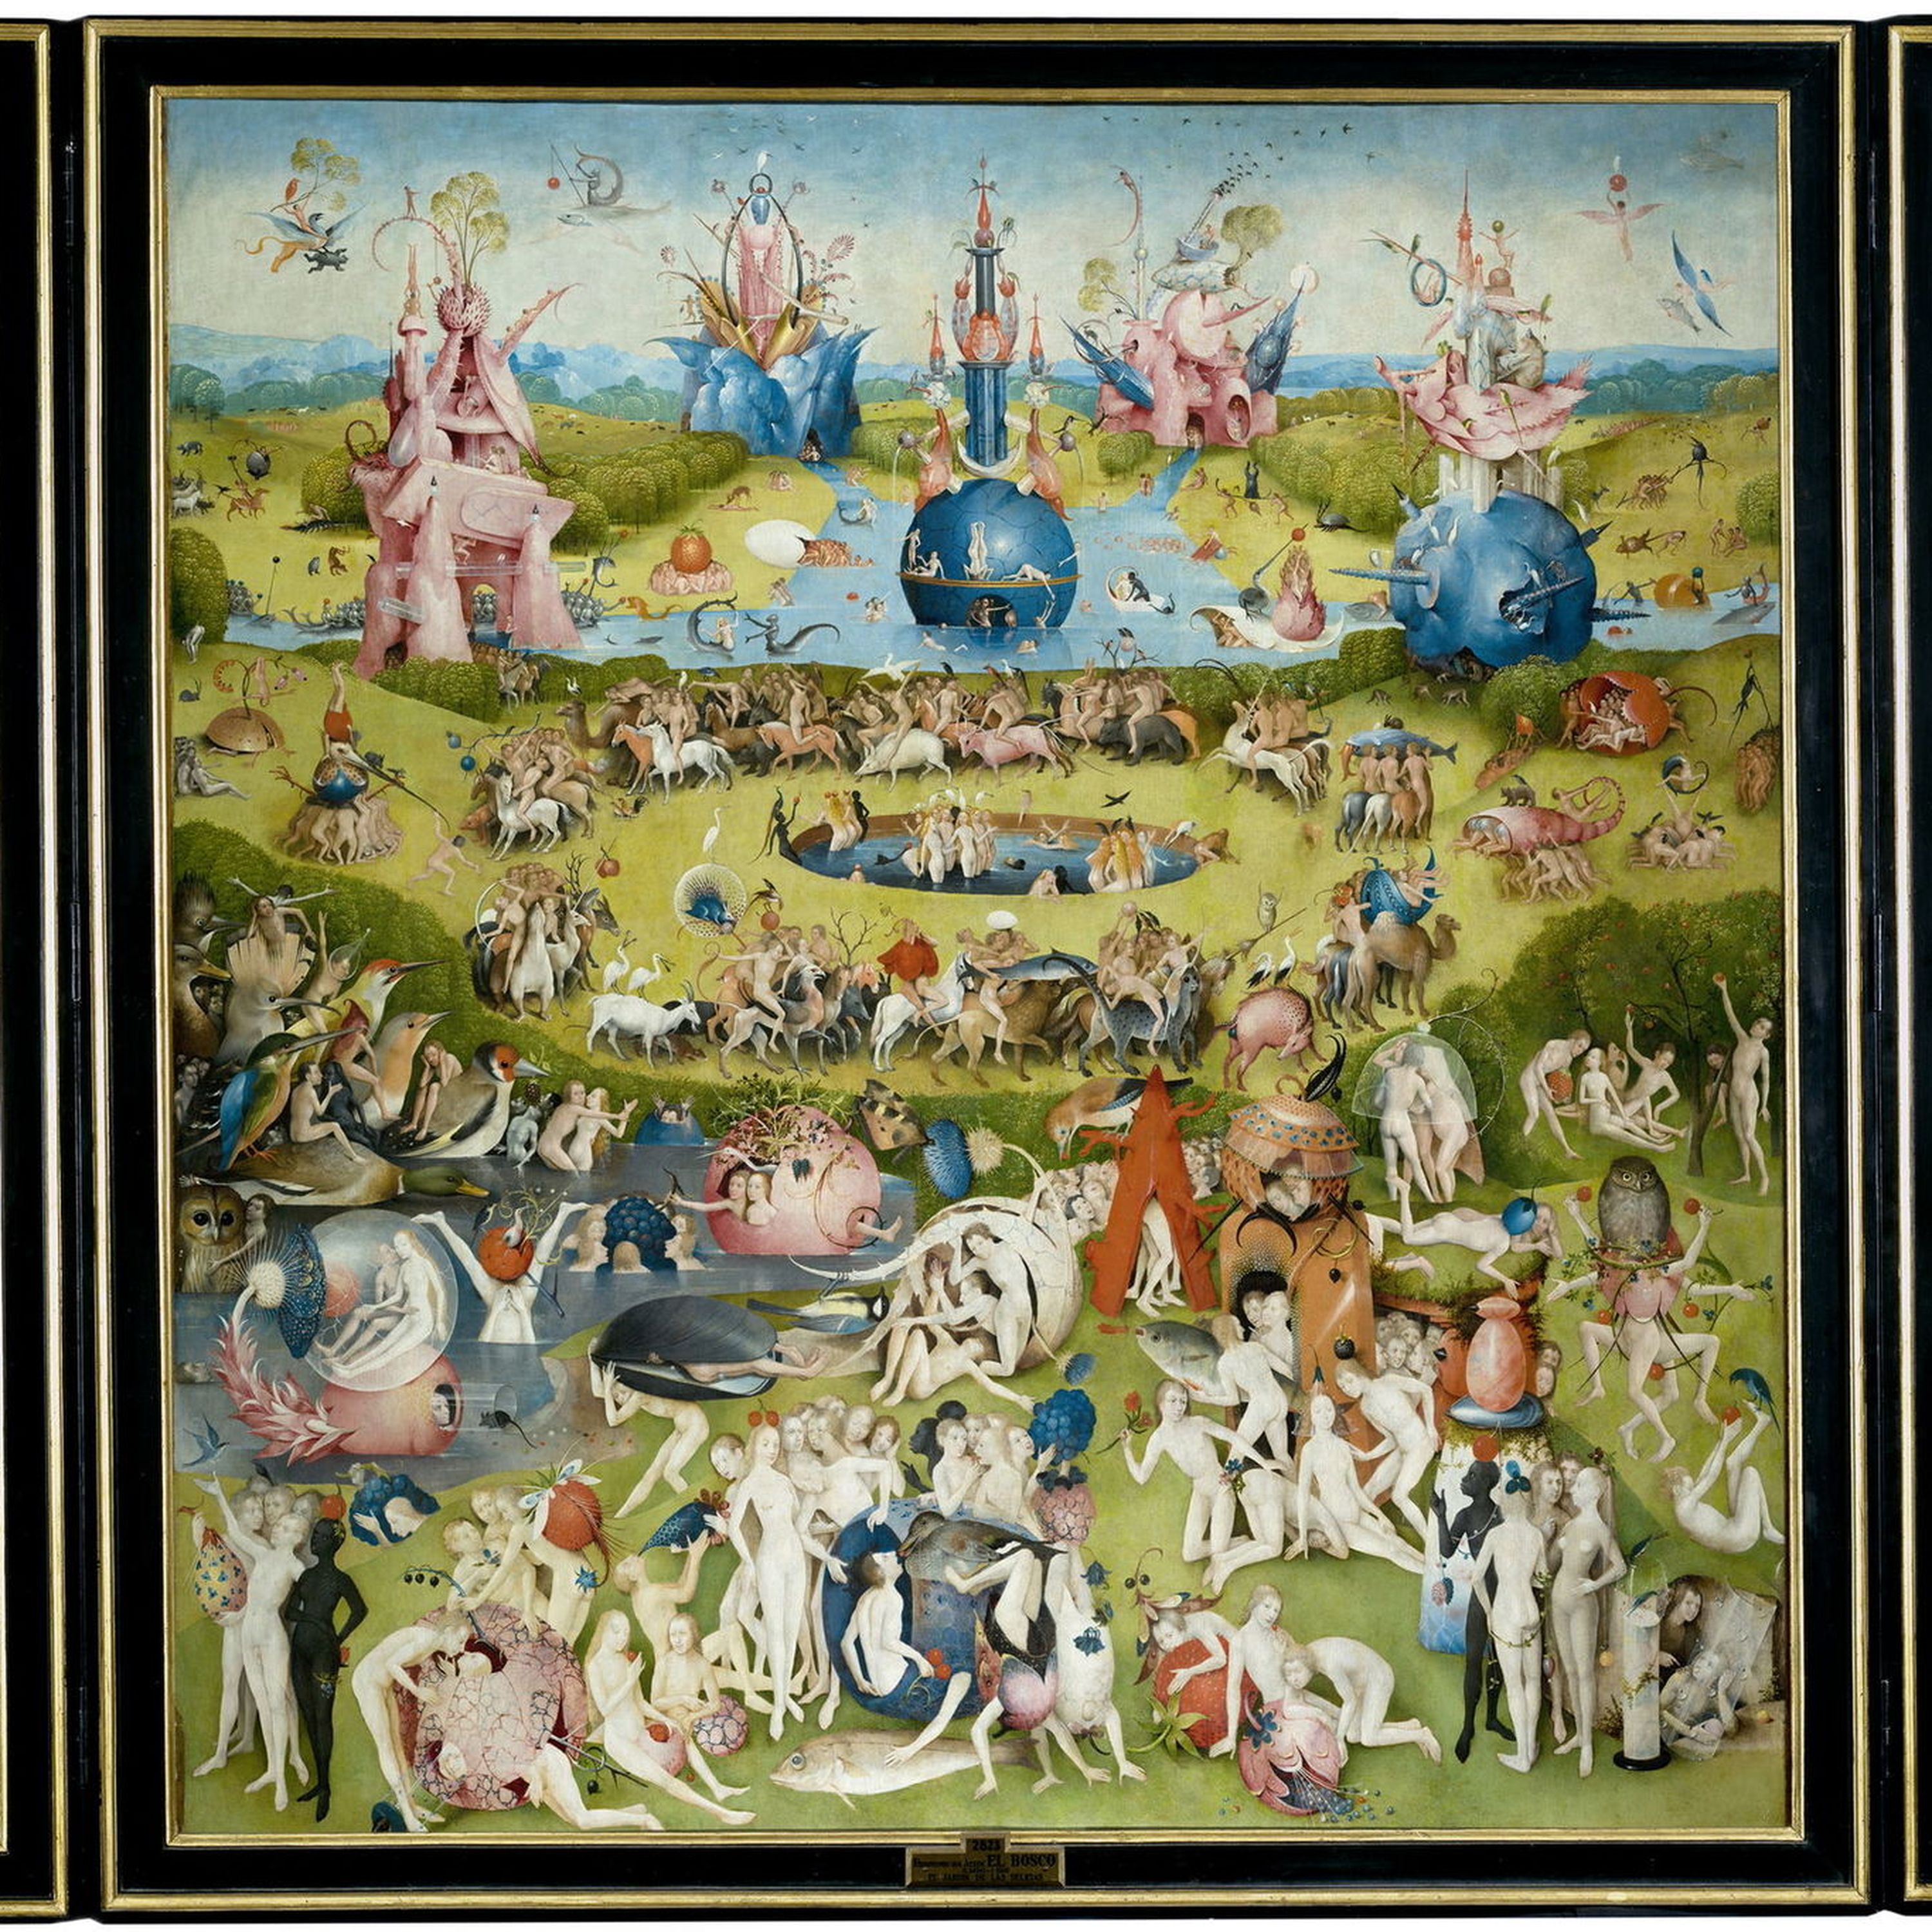 Garden of Earthly Delights by Hieronymous Bosch – with Waldemar Januszack